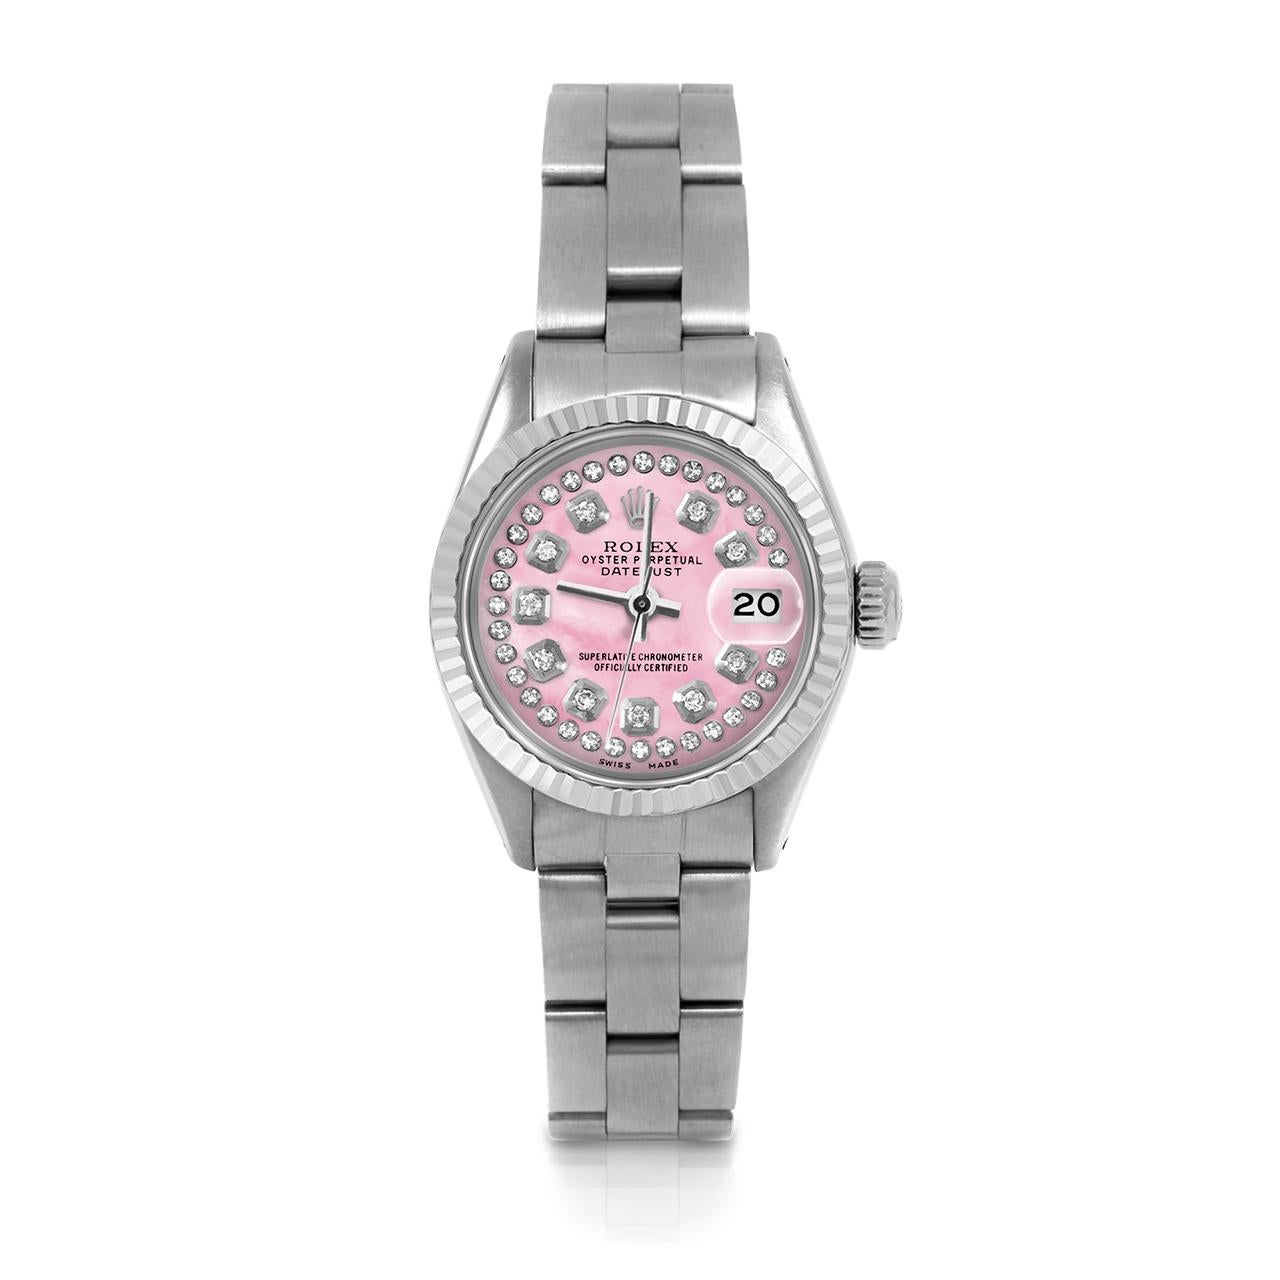 Pre-Owned Rolex 6917 Ladies 26mm Datejust Watch, Custom Pink Mother of Pearl String Diamond Dial & Fluted Bezel on Rolex Stainless Steel Oyster Band.   

SKU 6917-SS-PMOP-STRD-FLT-OYS


Brand/Model:        Rolex Datejust
Model Number:       